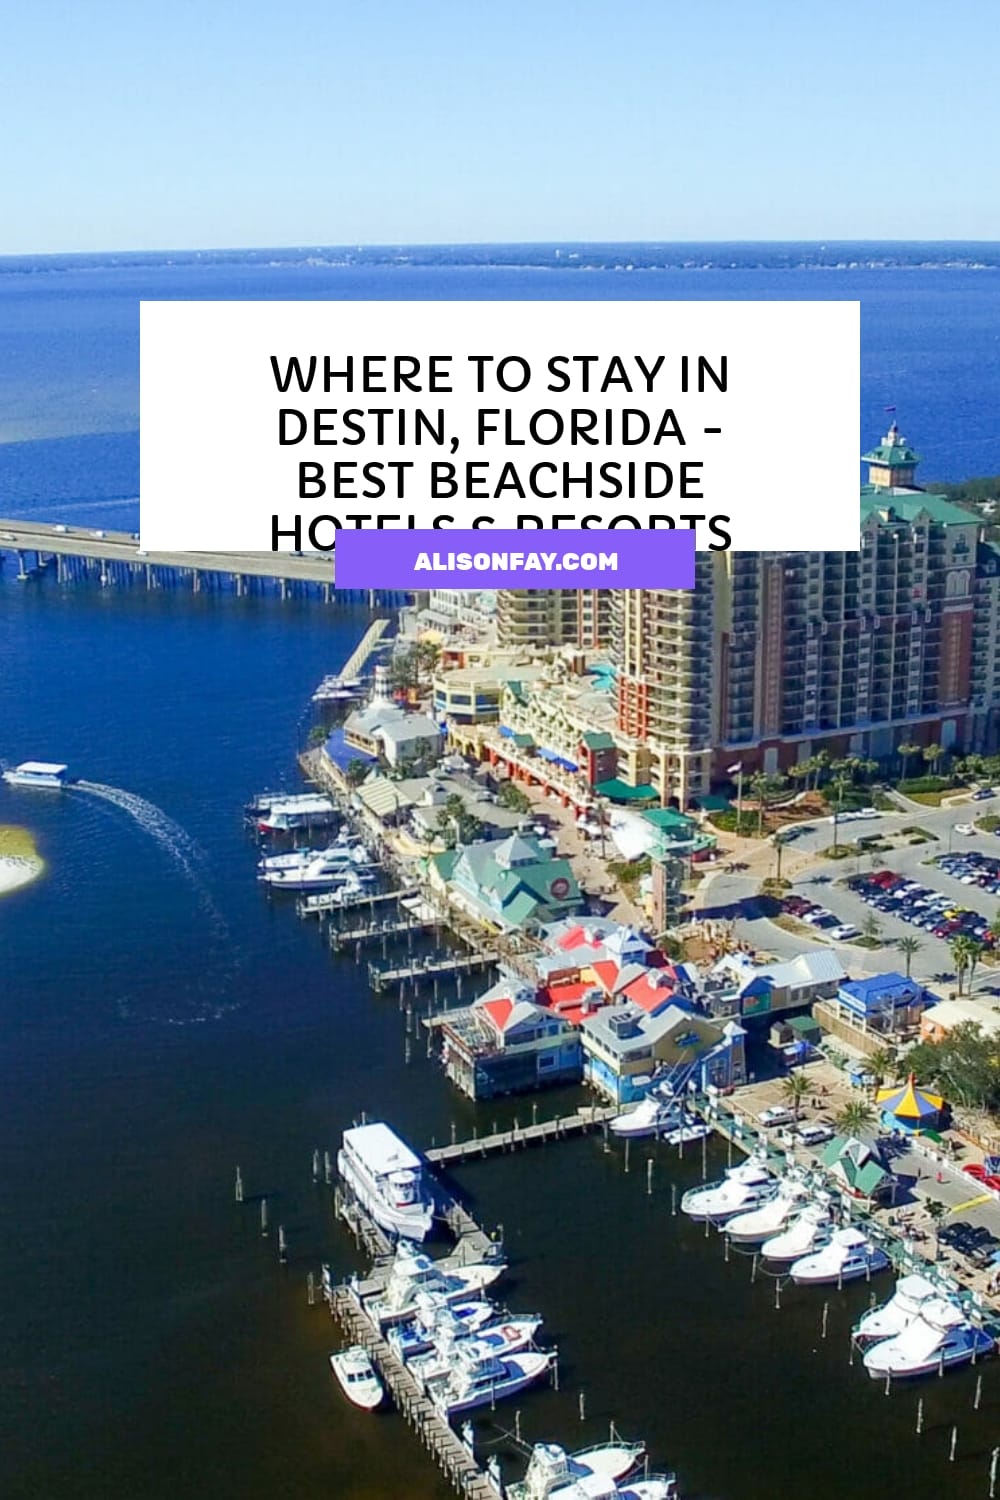 Where to stay in Destin, Florida – Best Beachside Hotels & Resorts